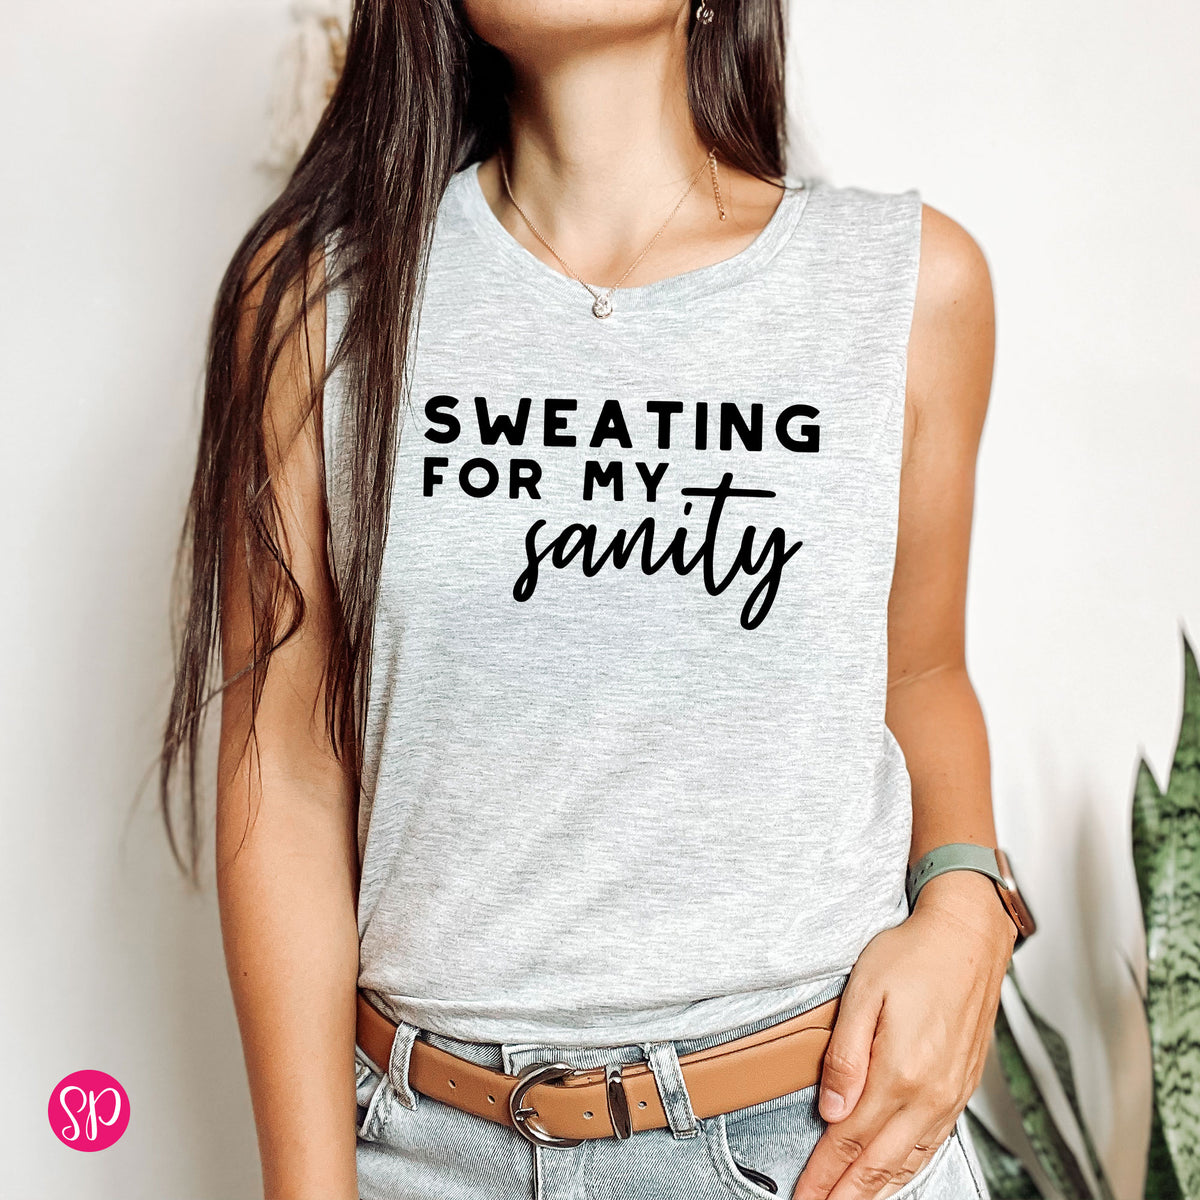 Sweating for My Sanity Funny Mom Women Workout Fitness Graphic Gym Tank Top Tee Shirt